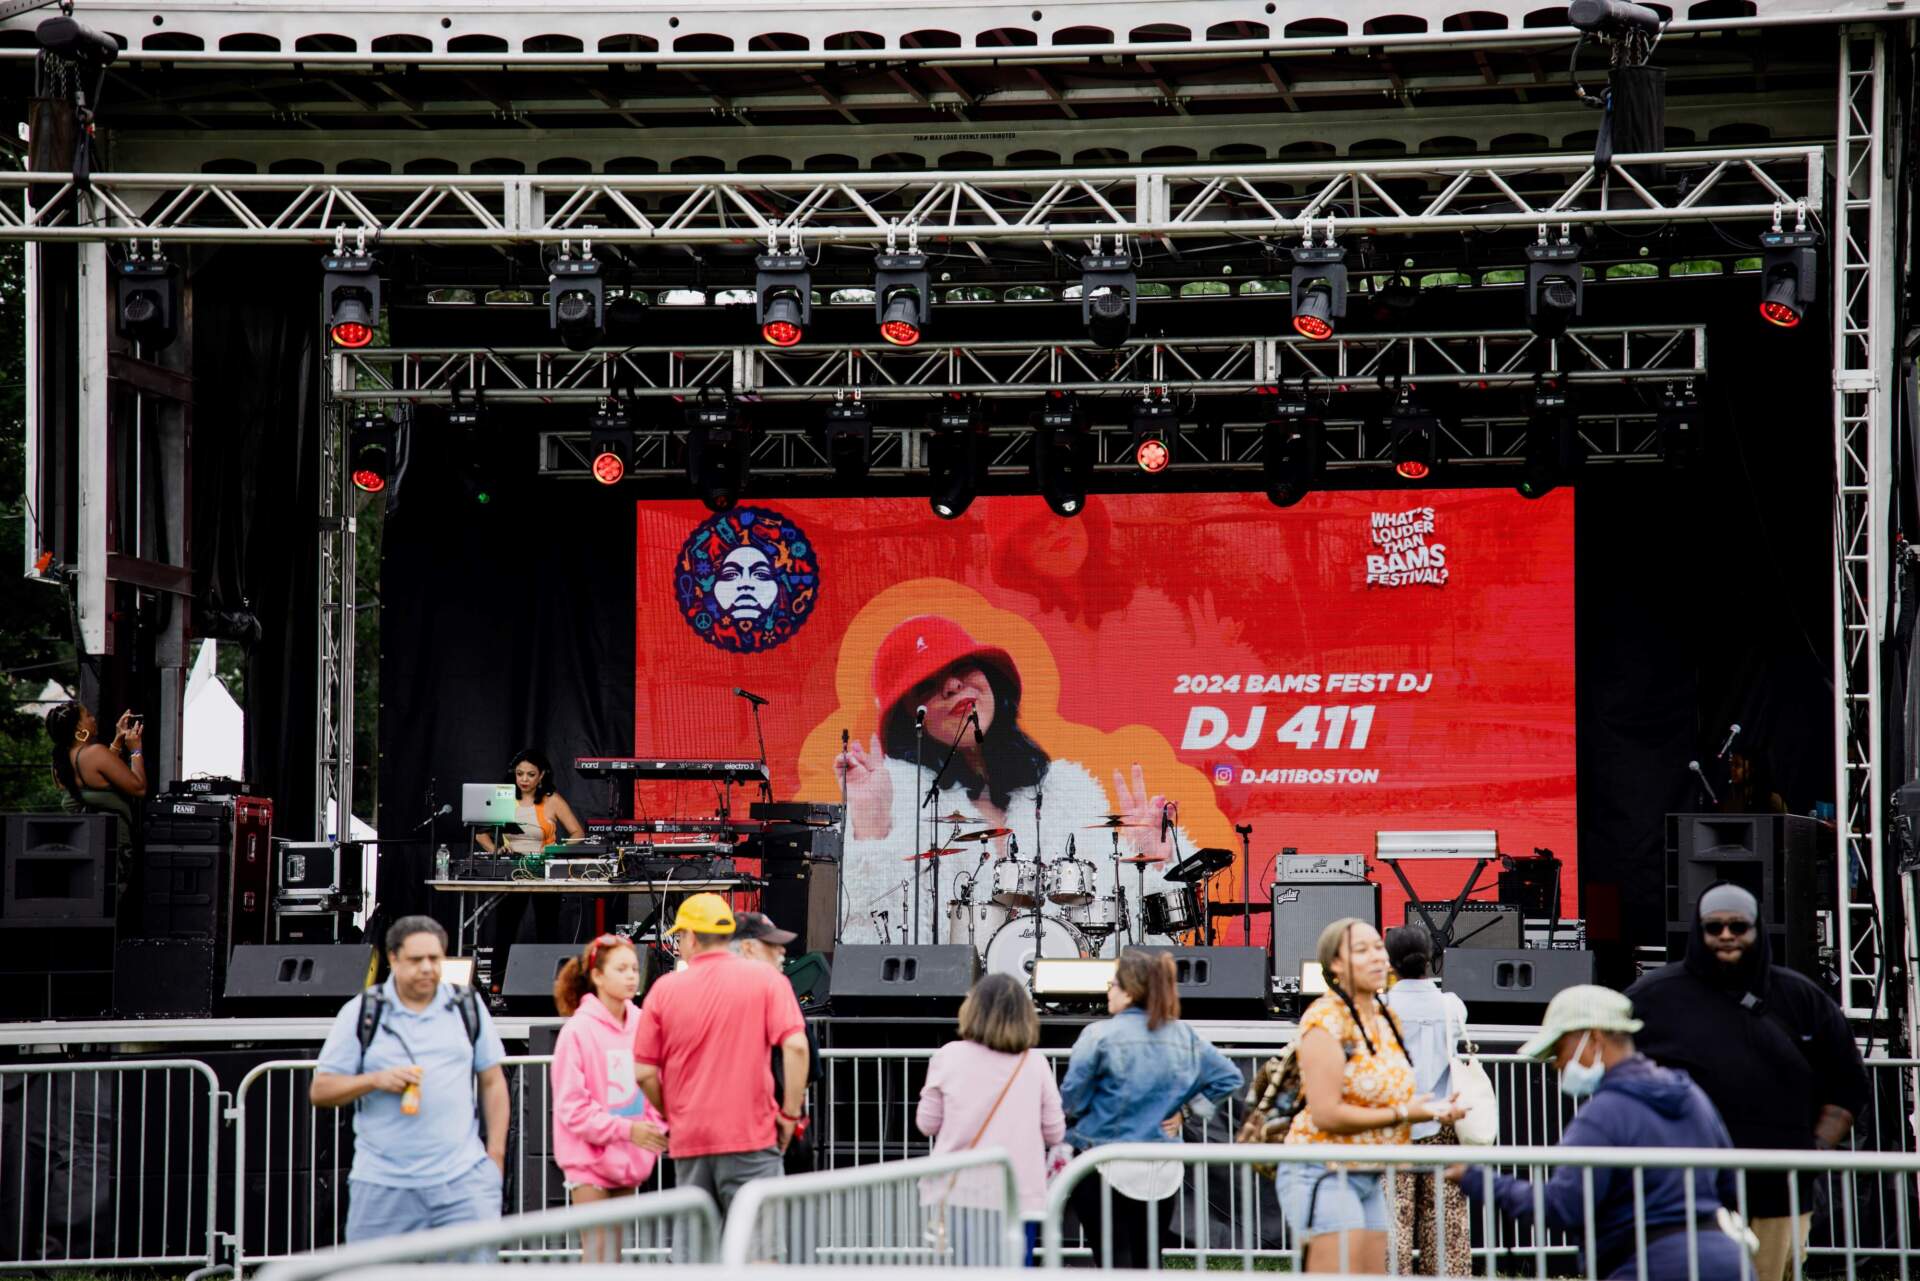 DJ 411 on stage at BAMS Festival 2024.  (Photo by Olivia Moon for WBUR)